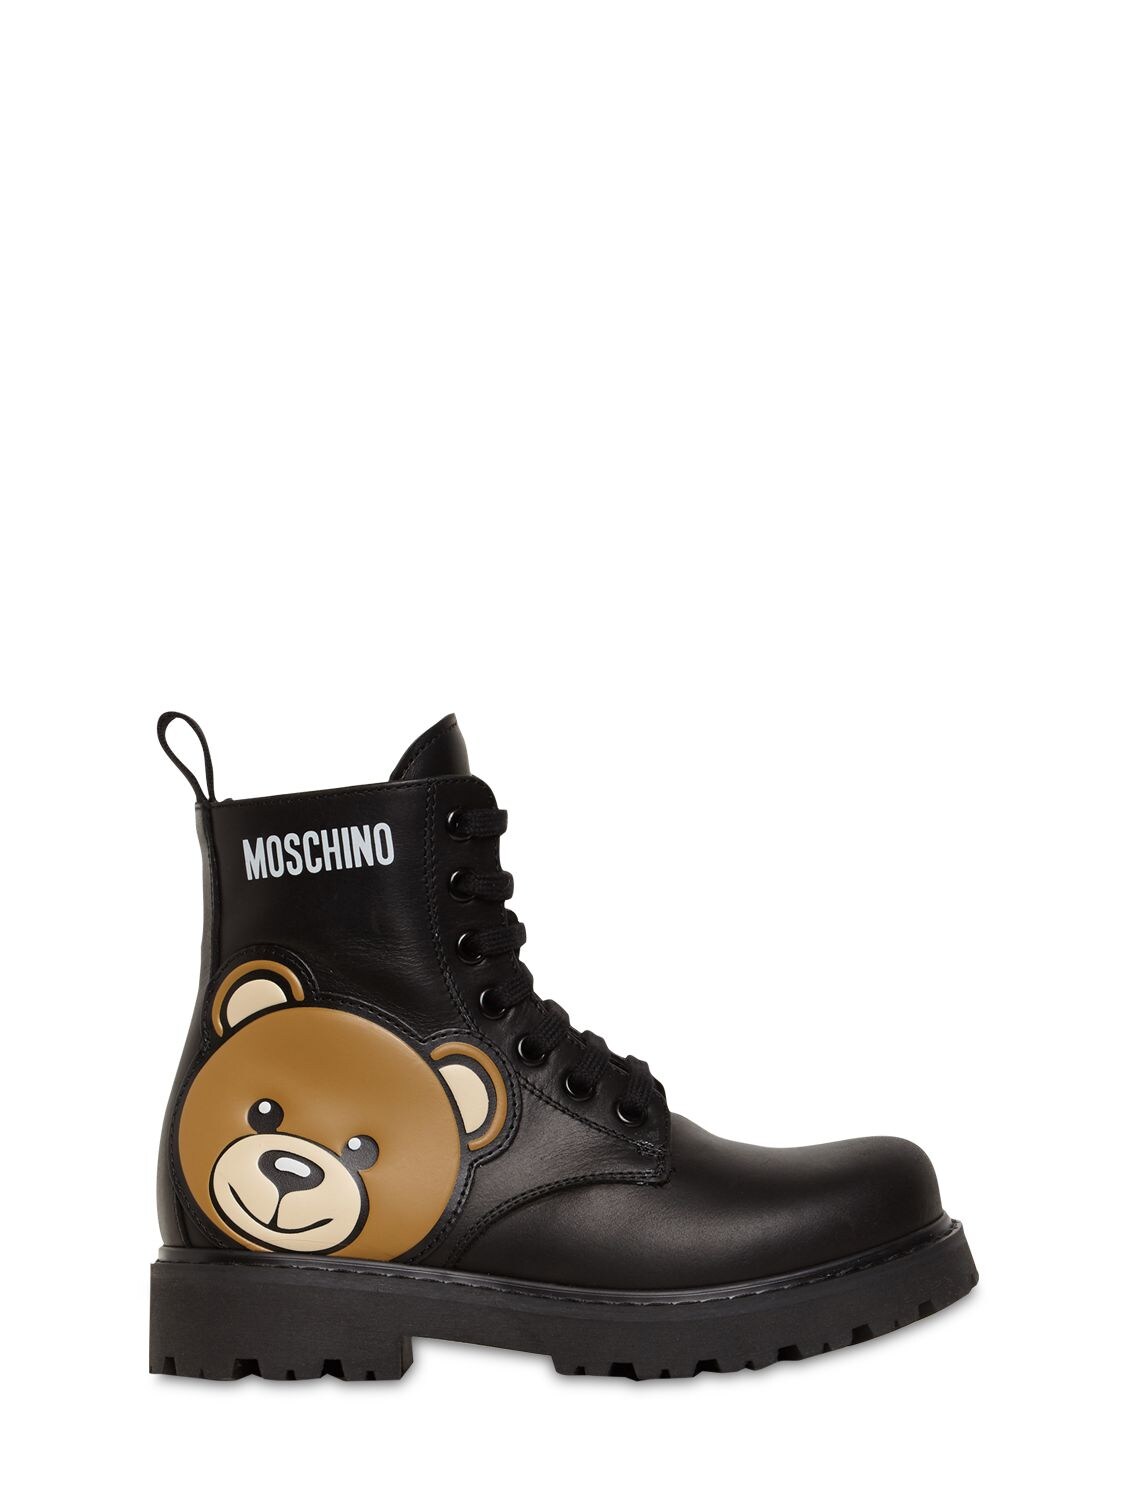 MOSCHINO LEATHER COMBAT BOOTS W/ TEDDY PATCH,74I1W4006-VKFSIDE1